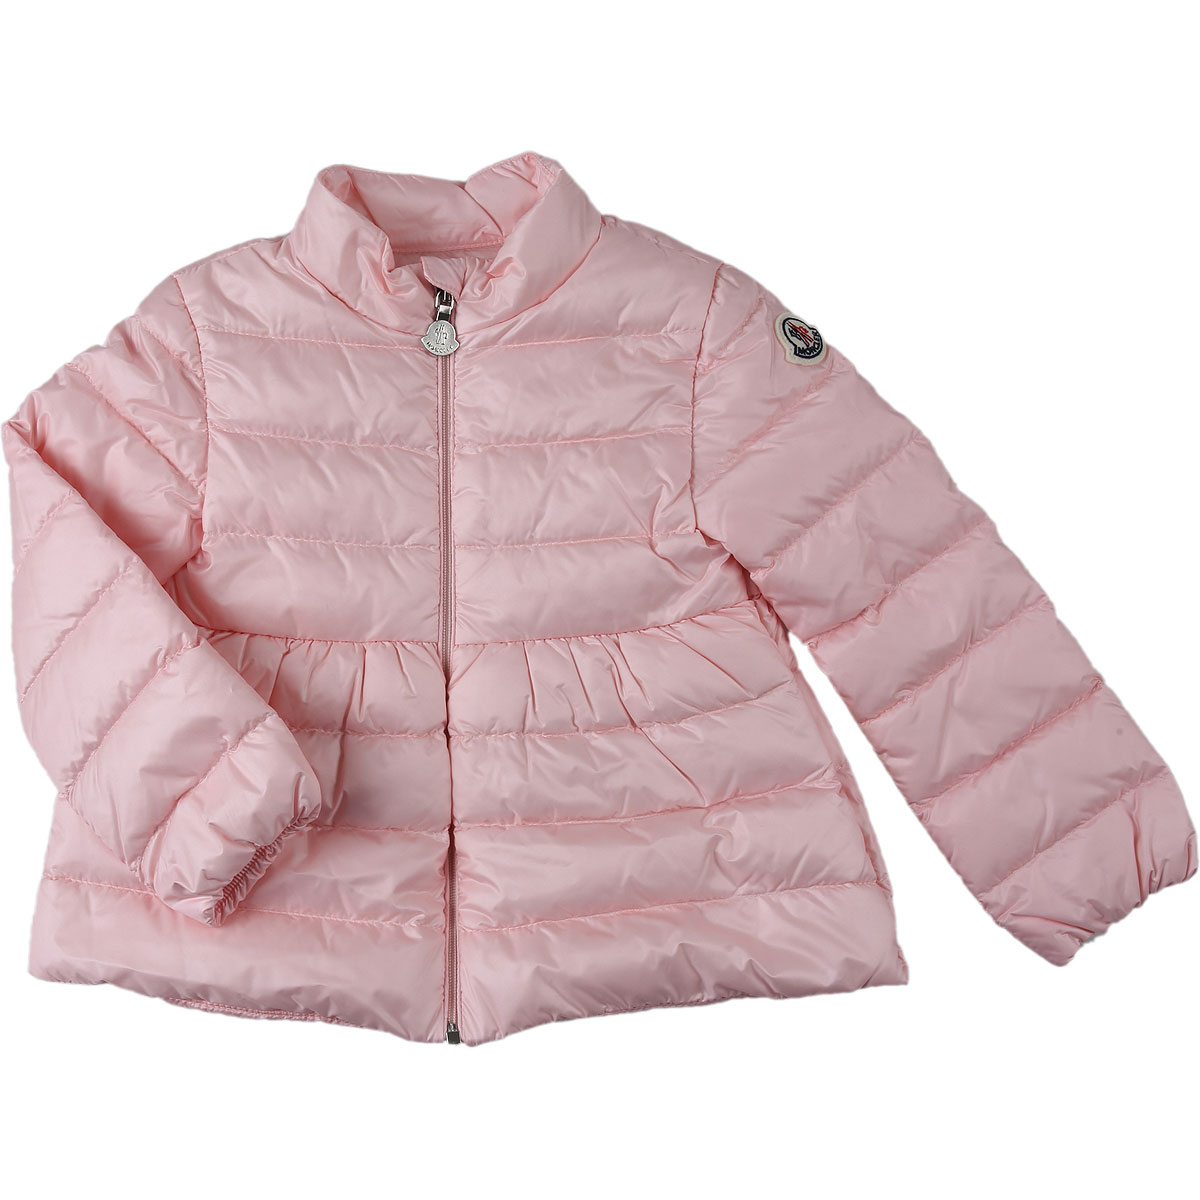 Baby Girl Clothing Moncler, Style code: 1a10710-53048-503